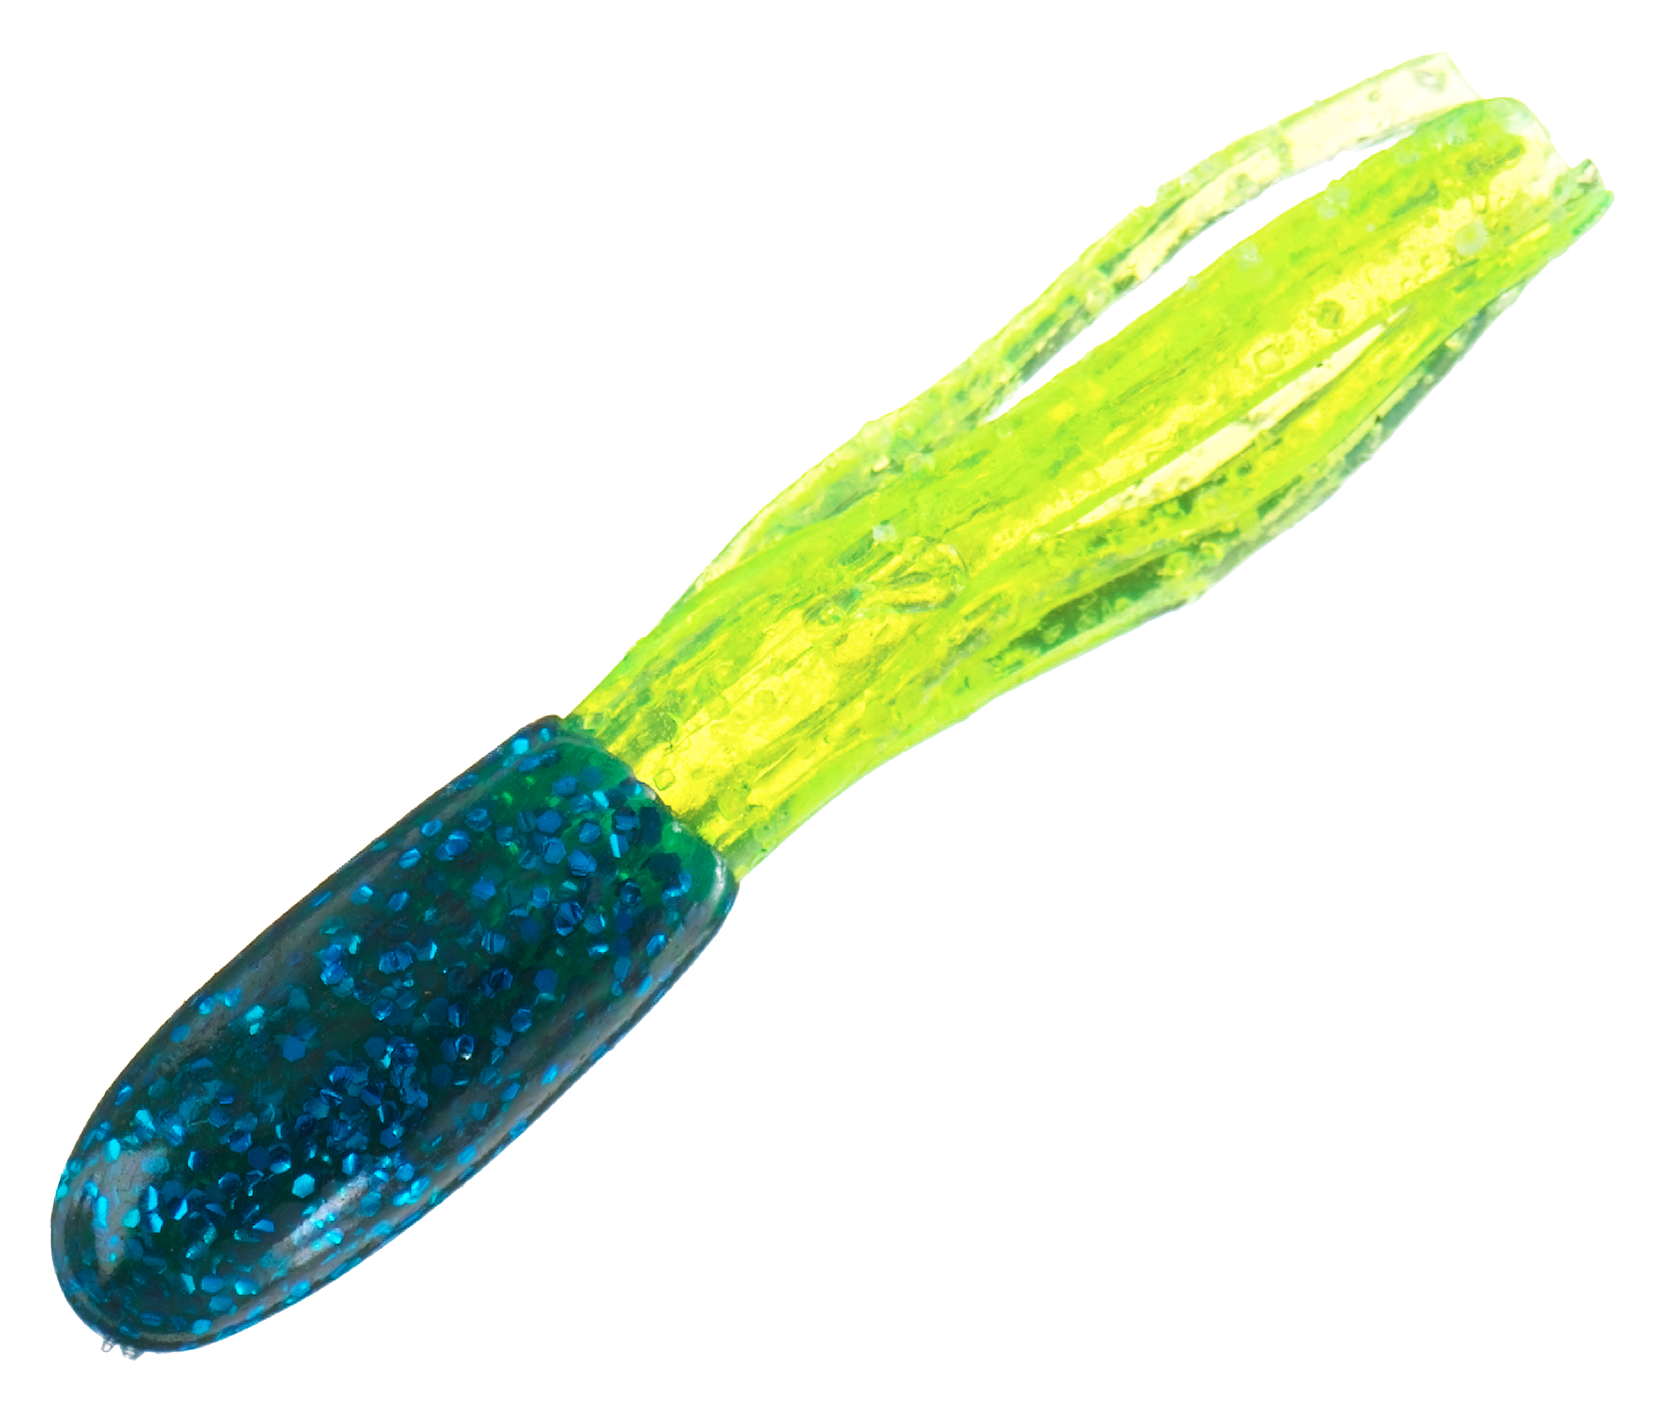 Bass Pro Shops Sparkle Squirts - 1-1/2"" - 15 pack - Electric Blue/Chartreuse